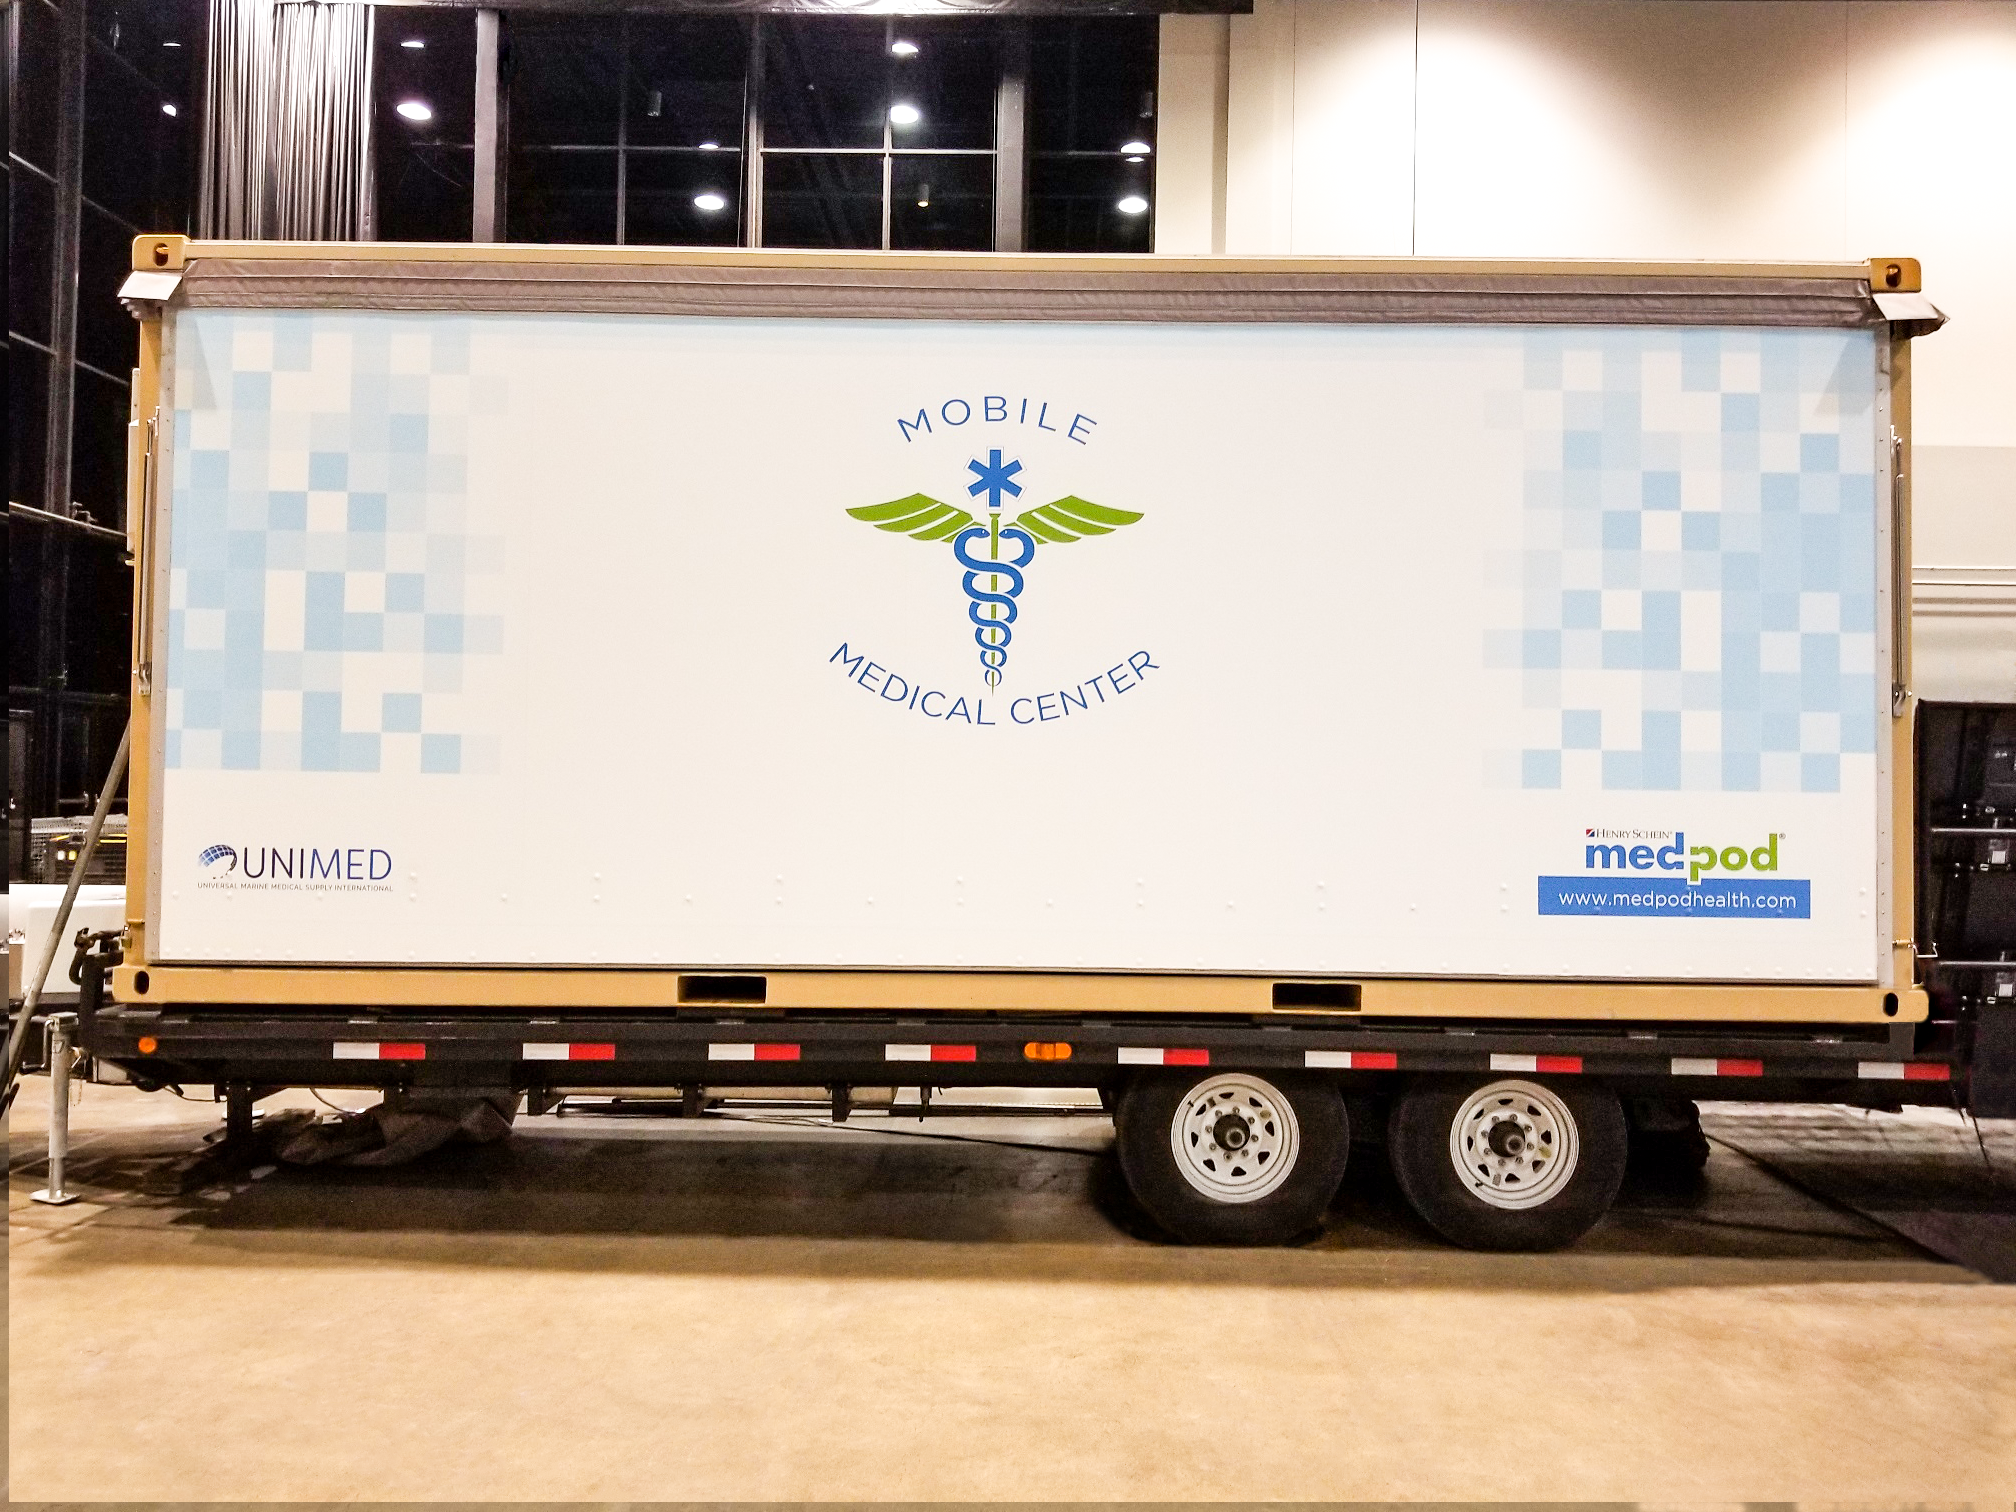 A trailer is wrapped for a mobile medical center